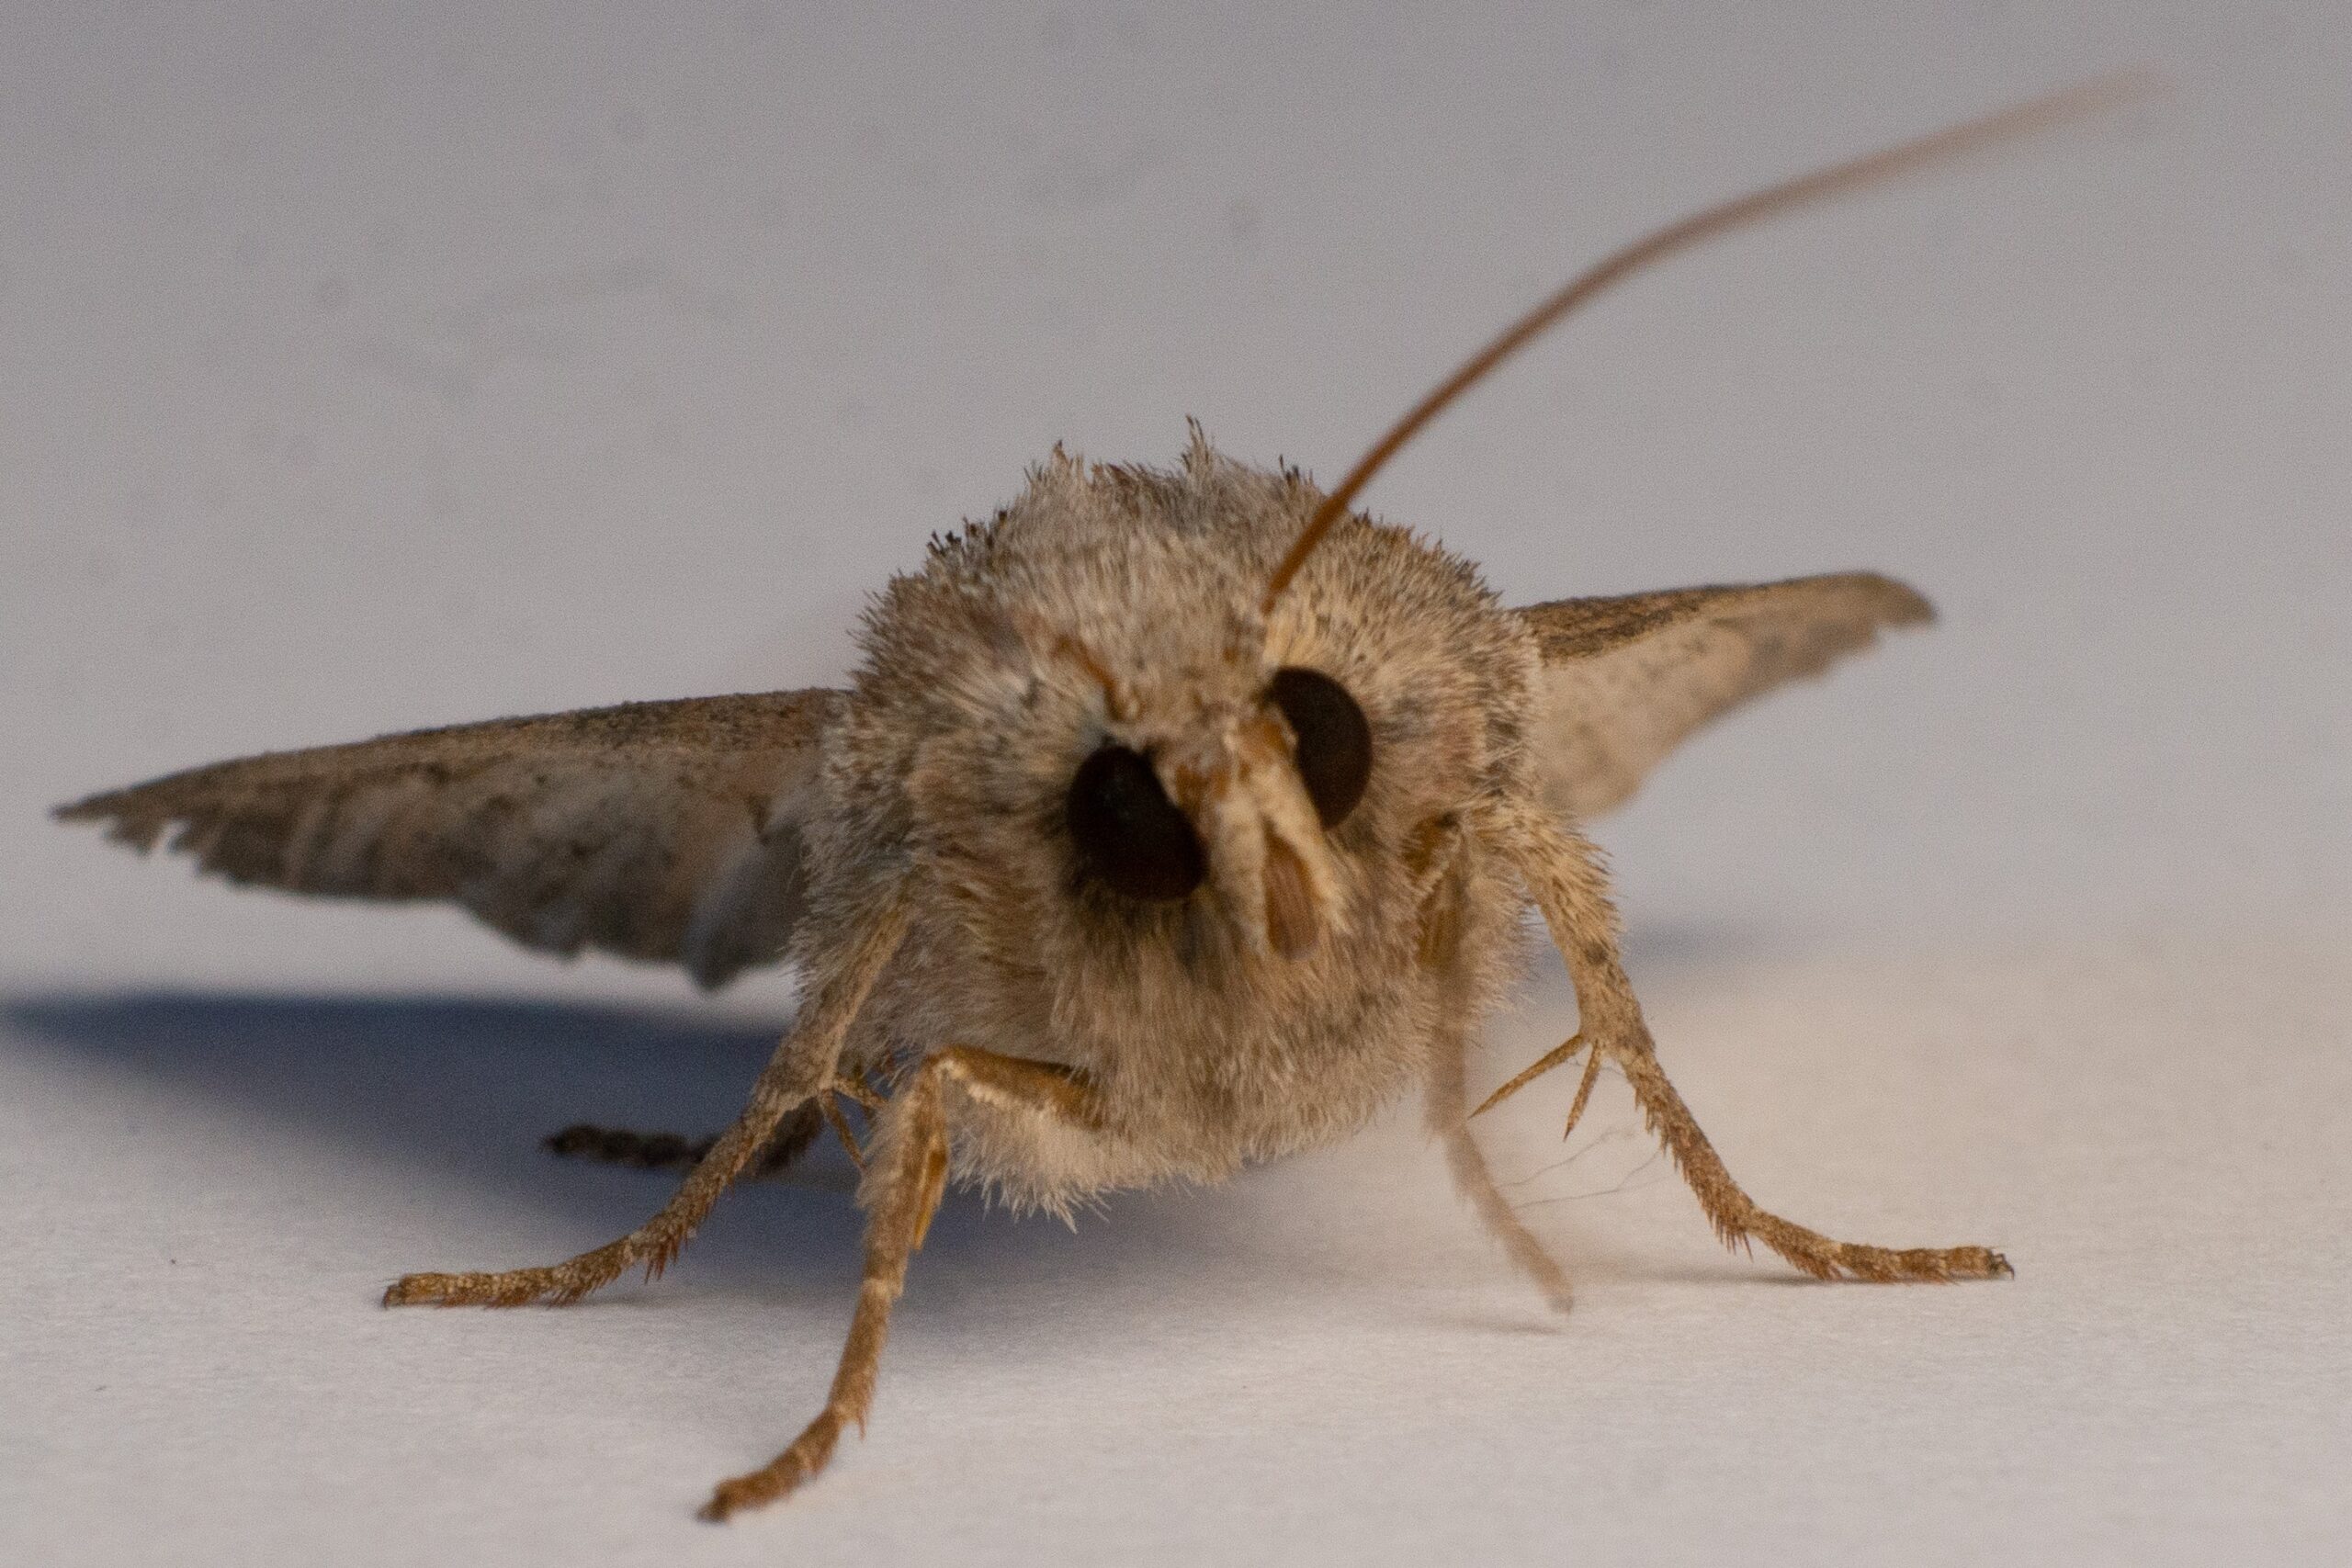 Why Are Moths Dusty?